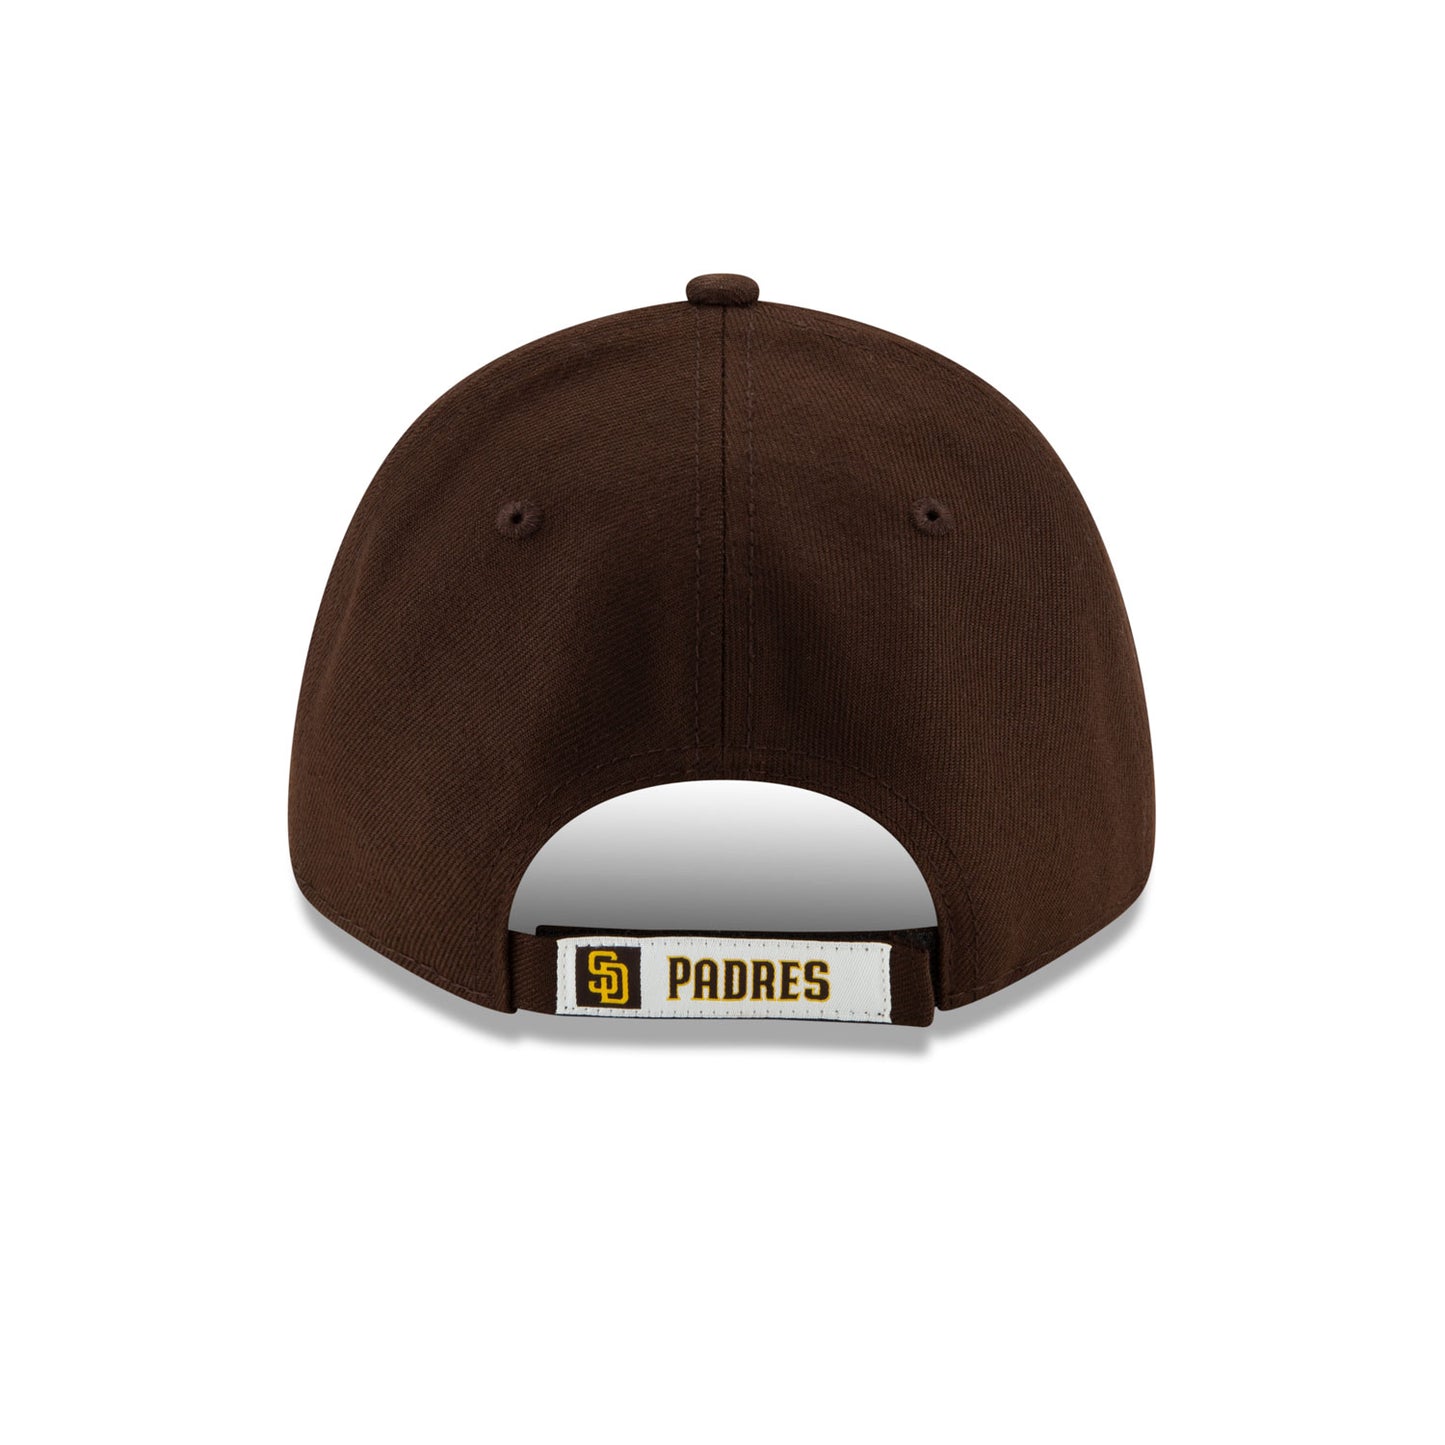 THE LEAGUE San Diego Padres 9FORTY New Era Cap